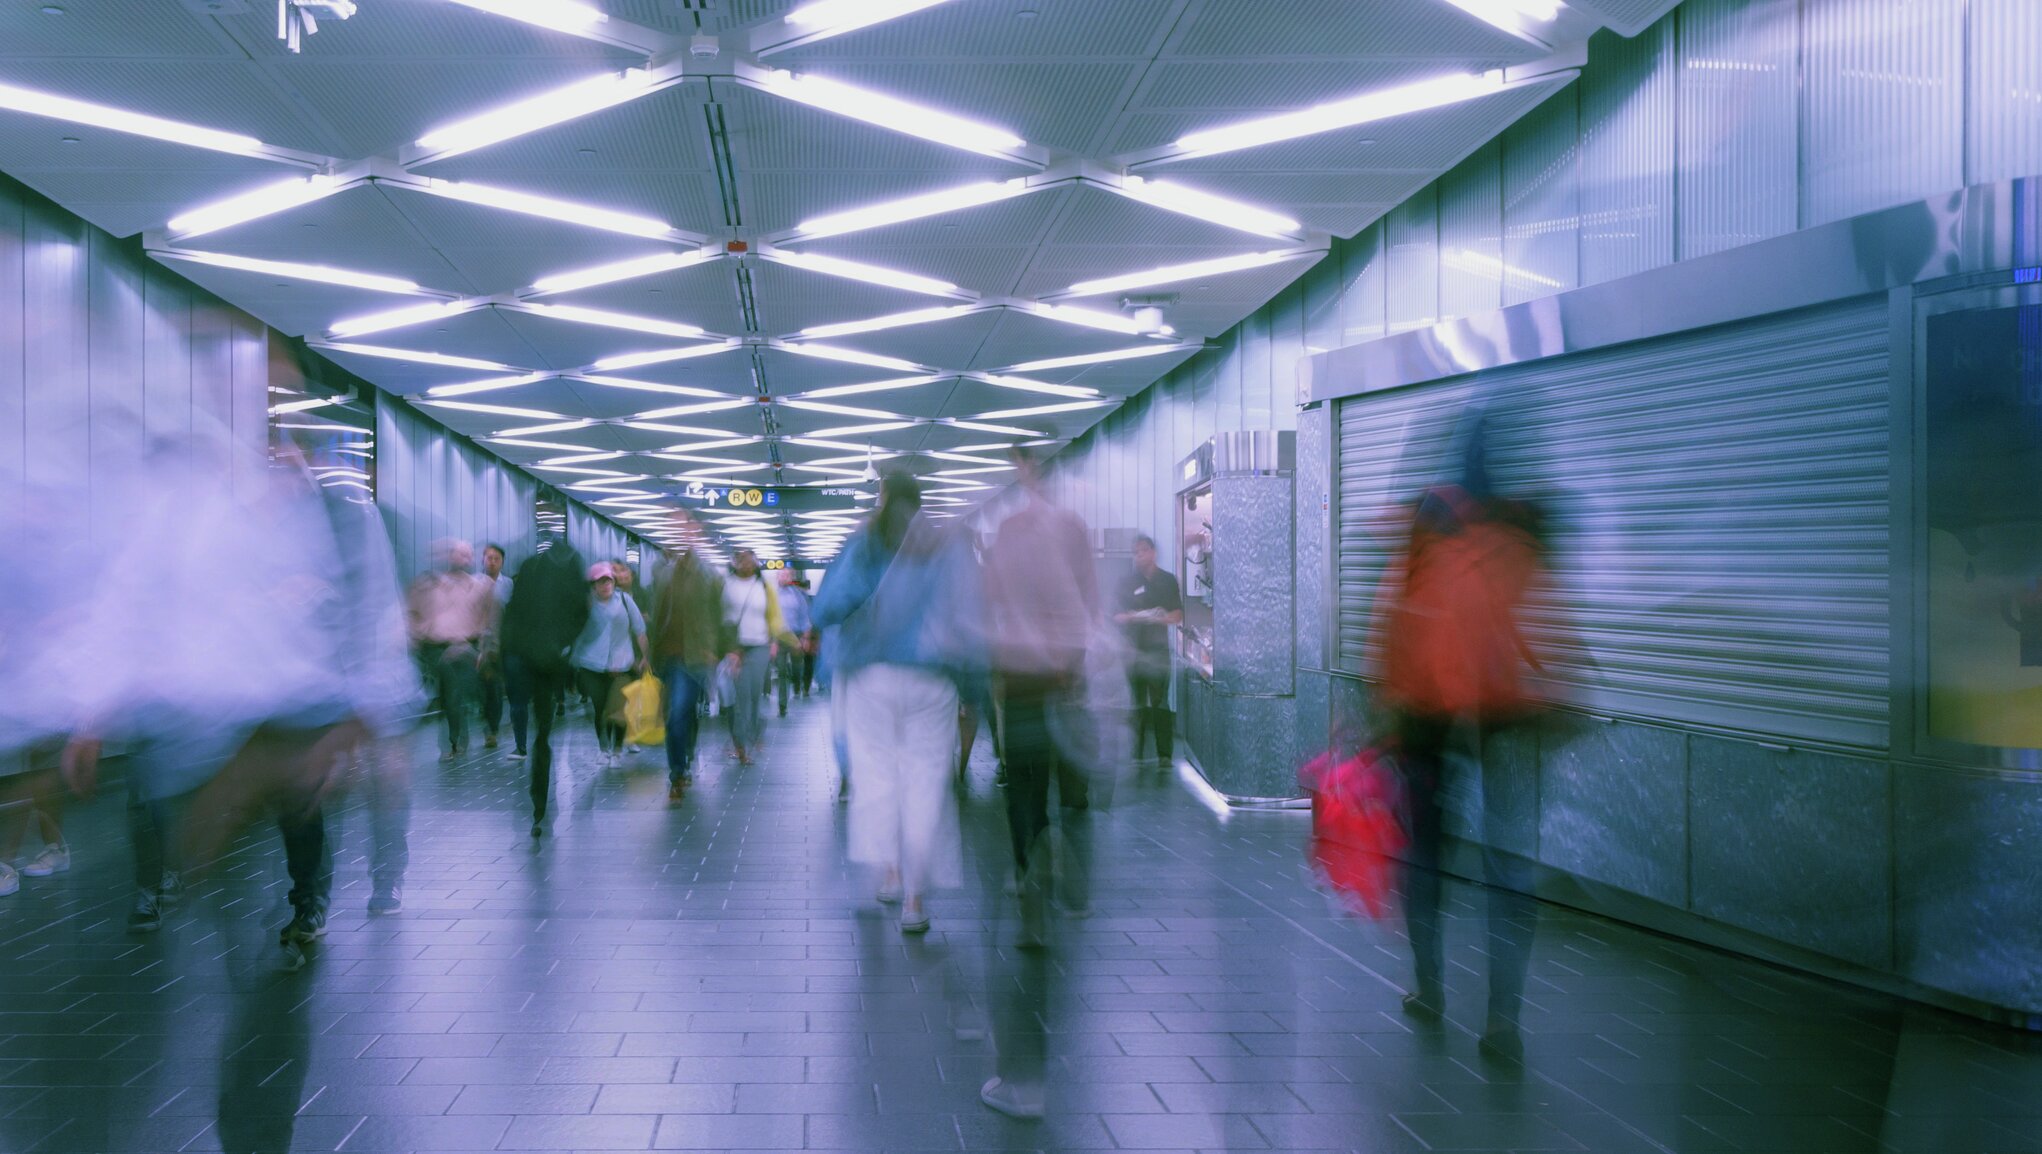 people on subway platform, a blurry image to demonstrate tired eyes.